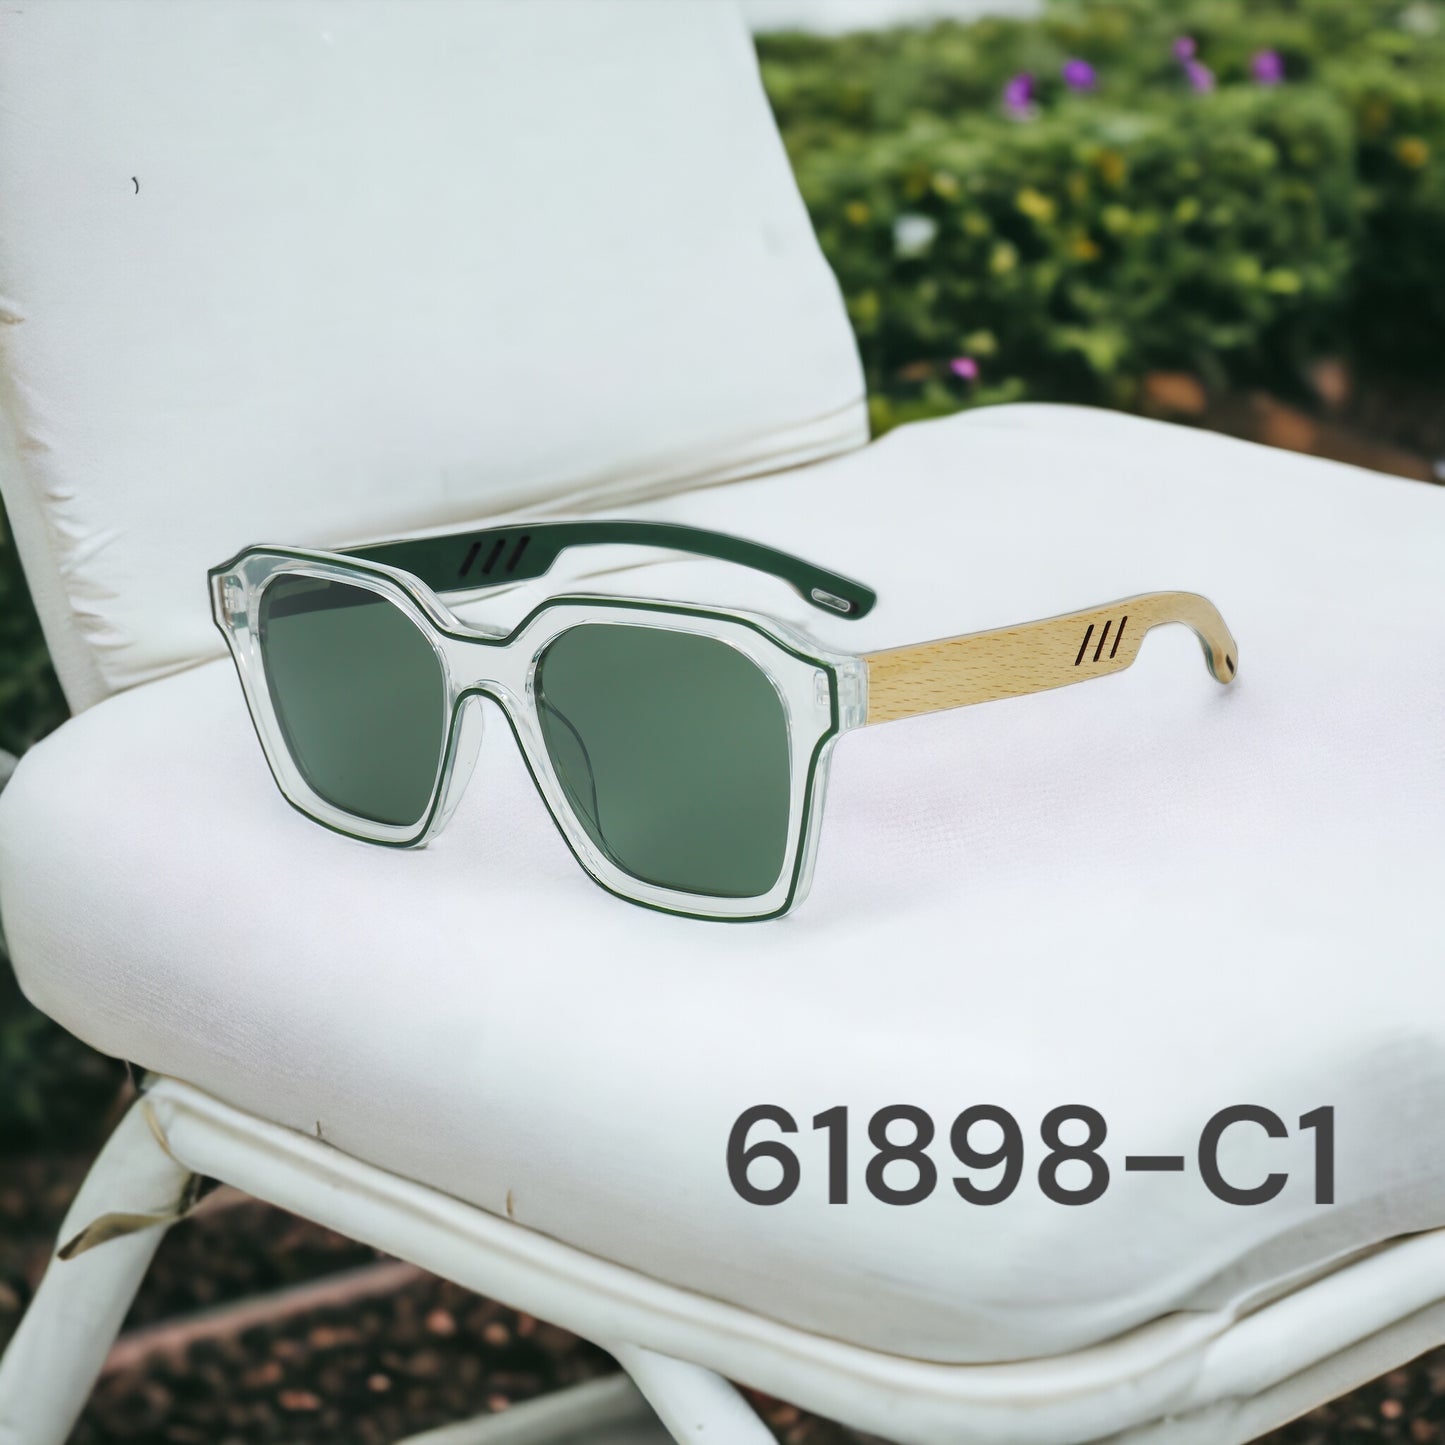 61898-C1 Stylish Sunglasses with colored Wood/Bamboo Frame UV400 Lens fit all weather